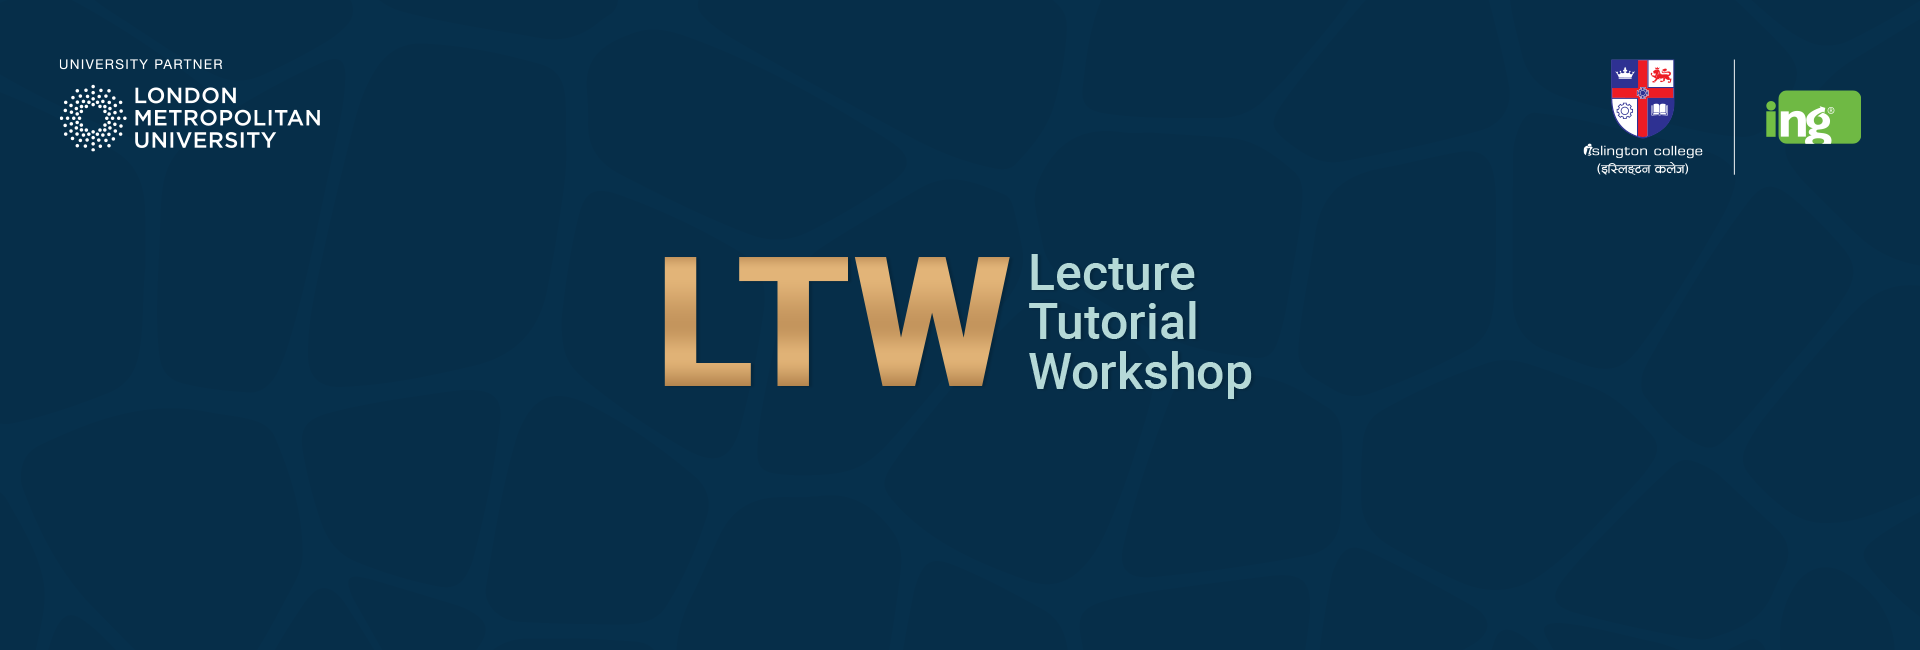 LTW_Lecture, Tutorial, and Workshop